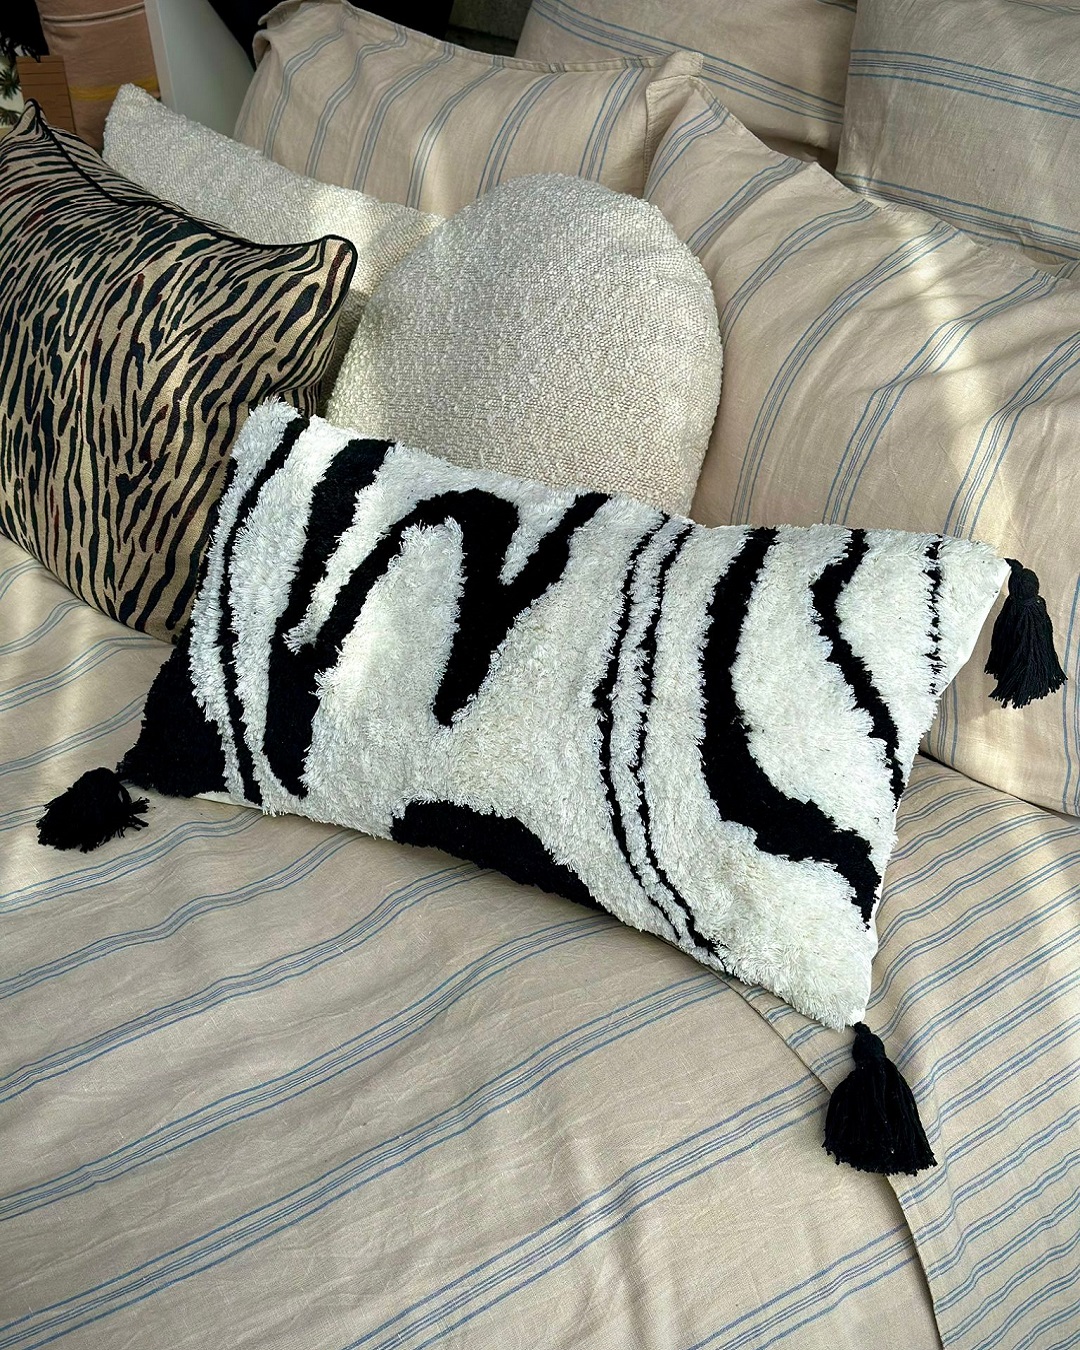 black and white squiggle cushion on bed with black tassels